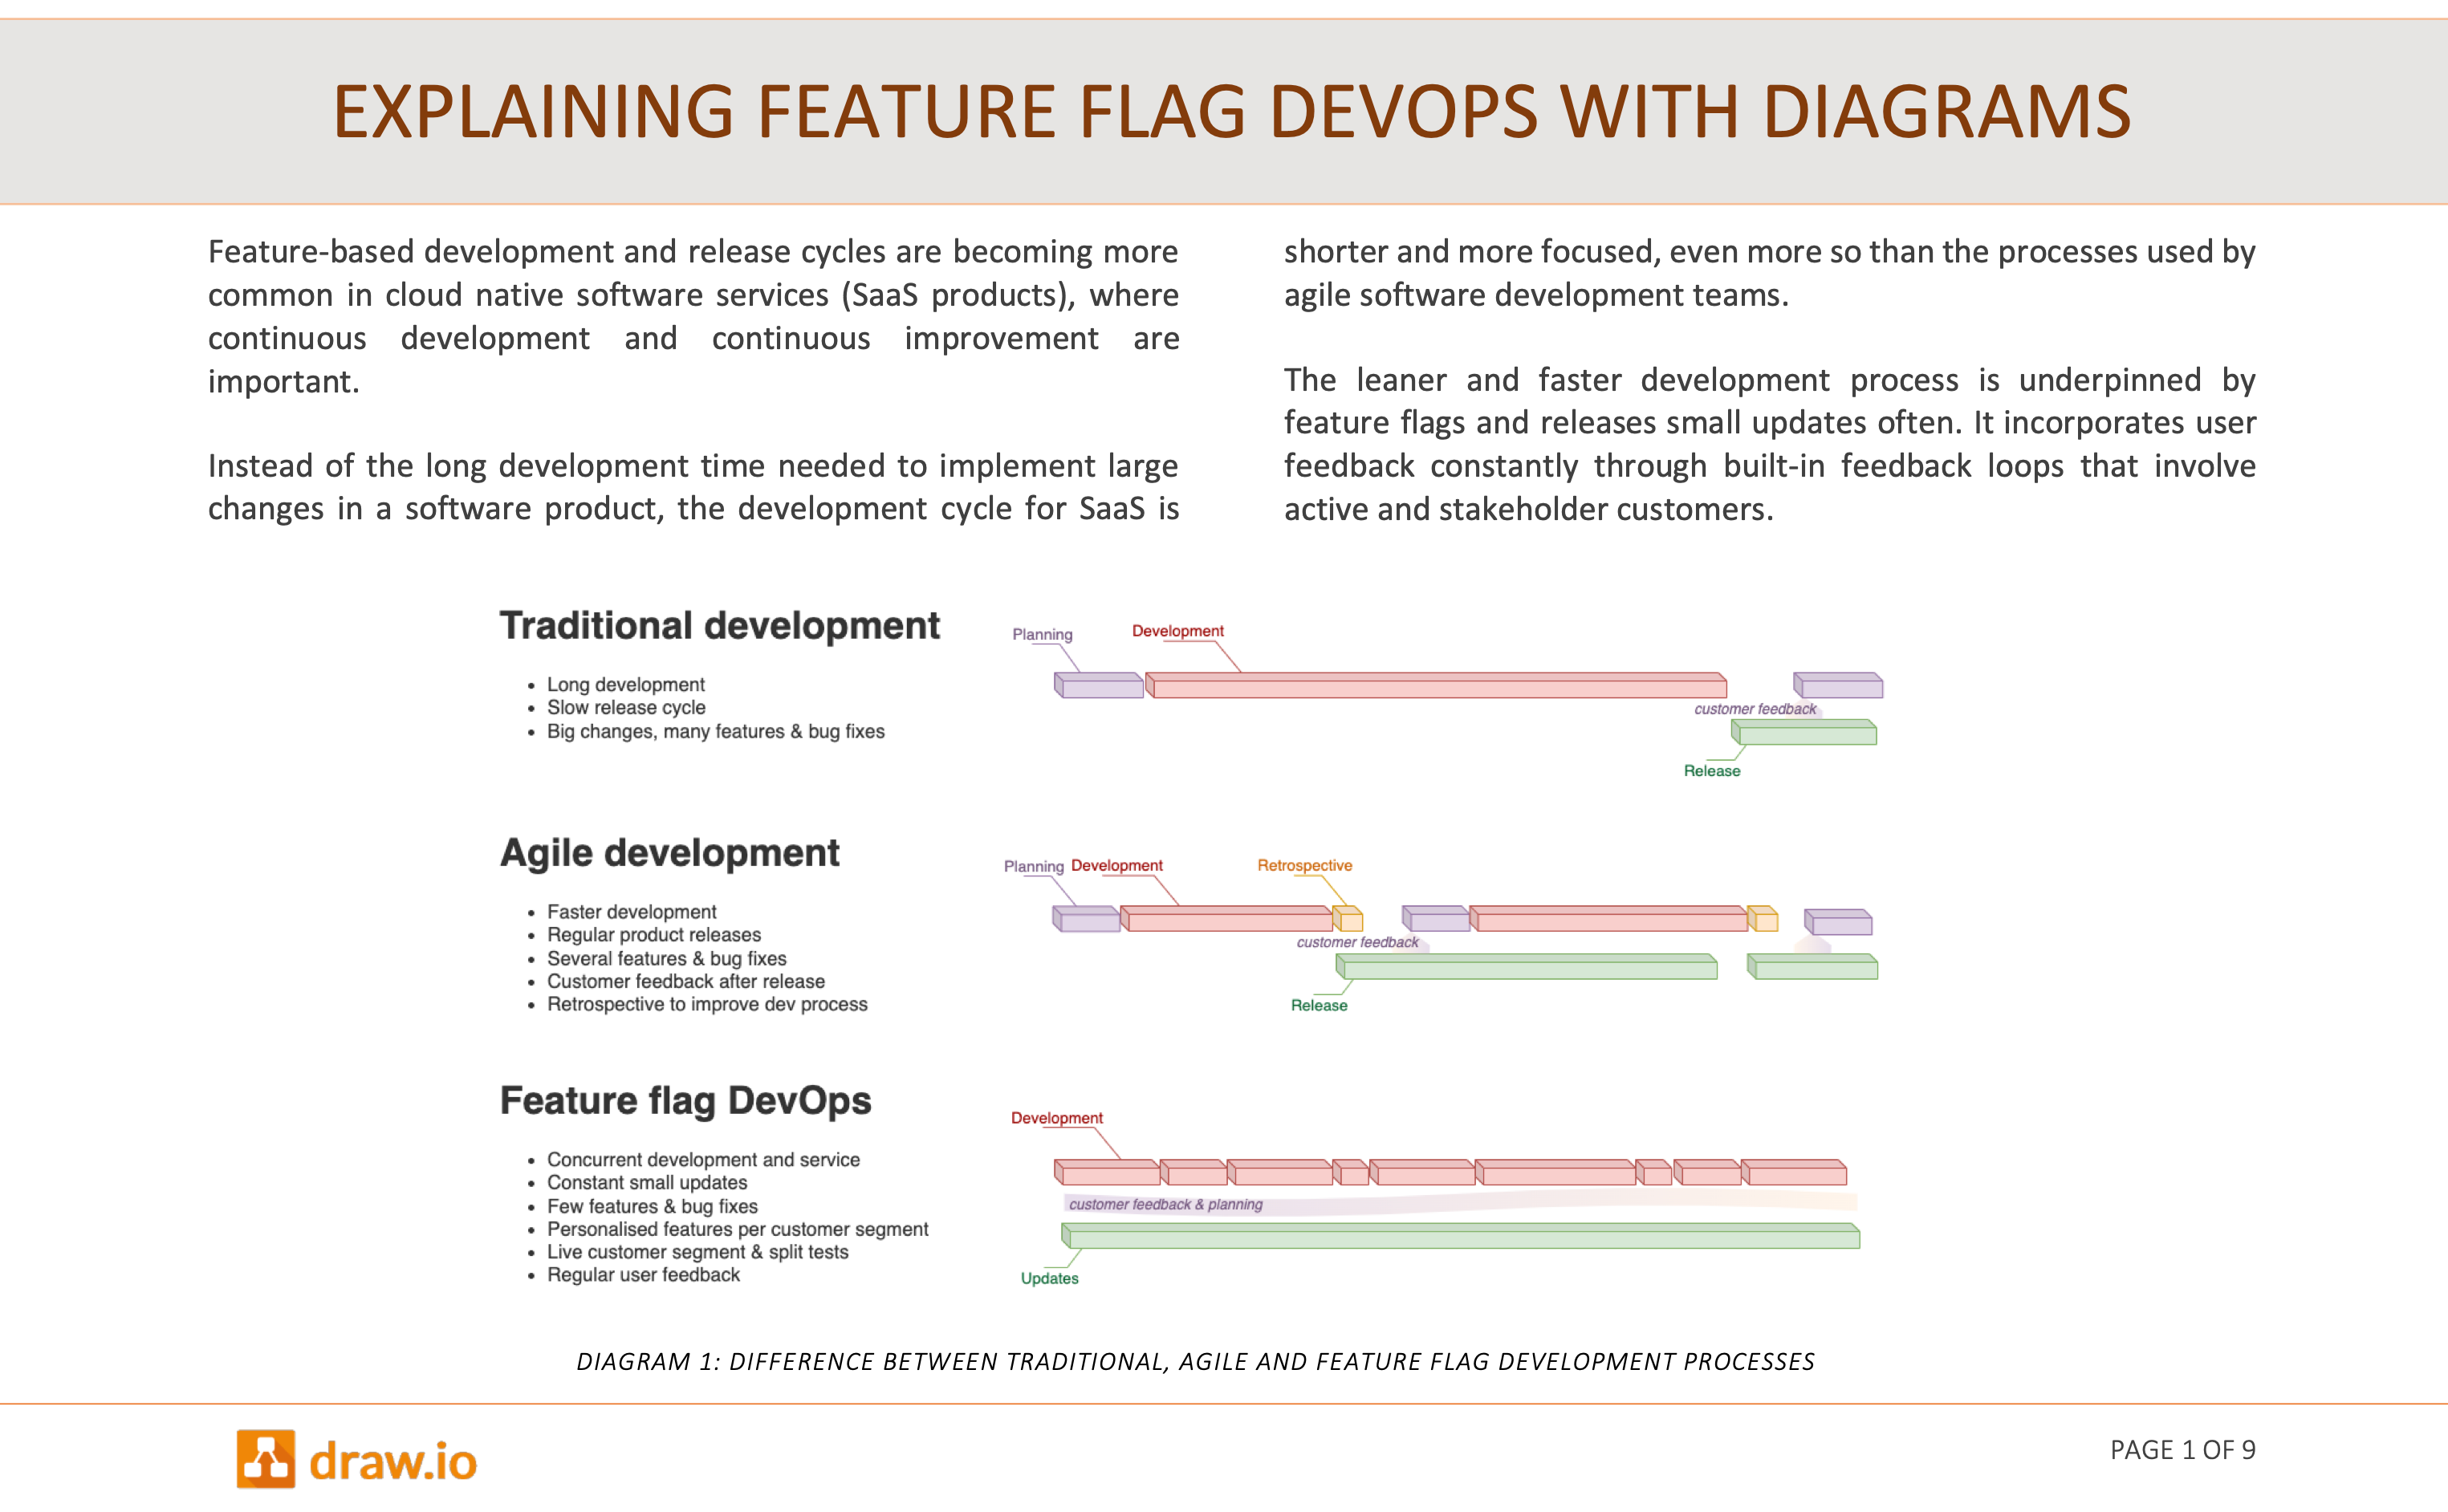 A new whitepaper to explain how feature flags DevOps works easier with diagrams